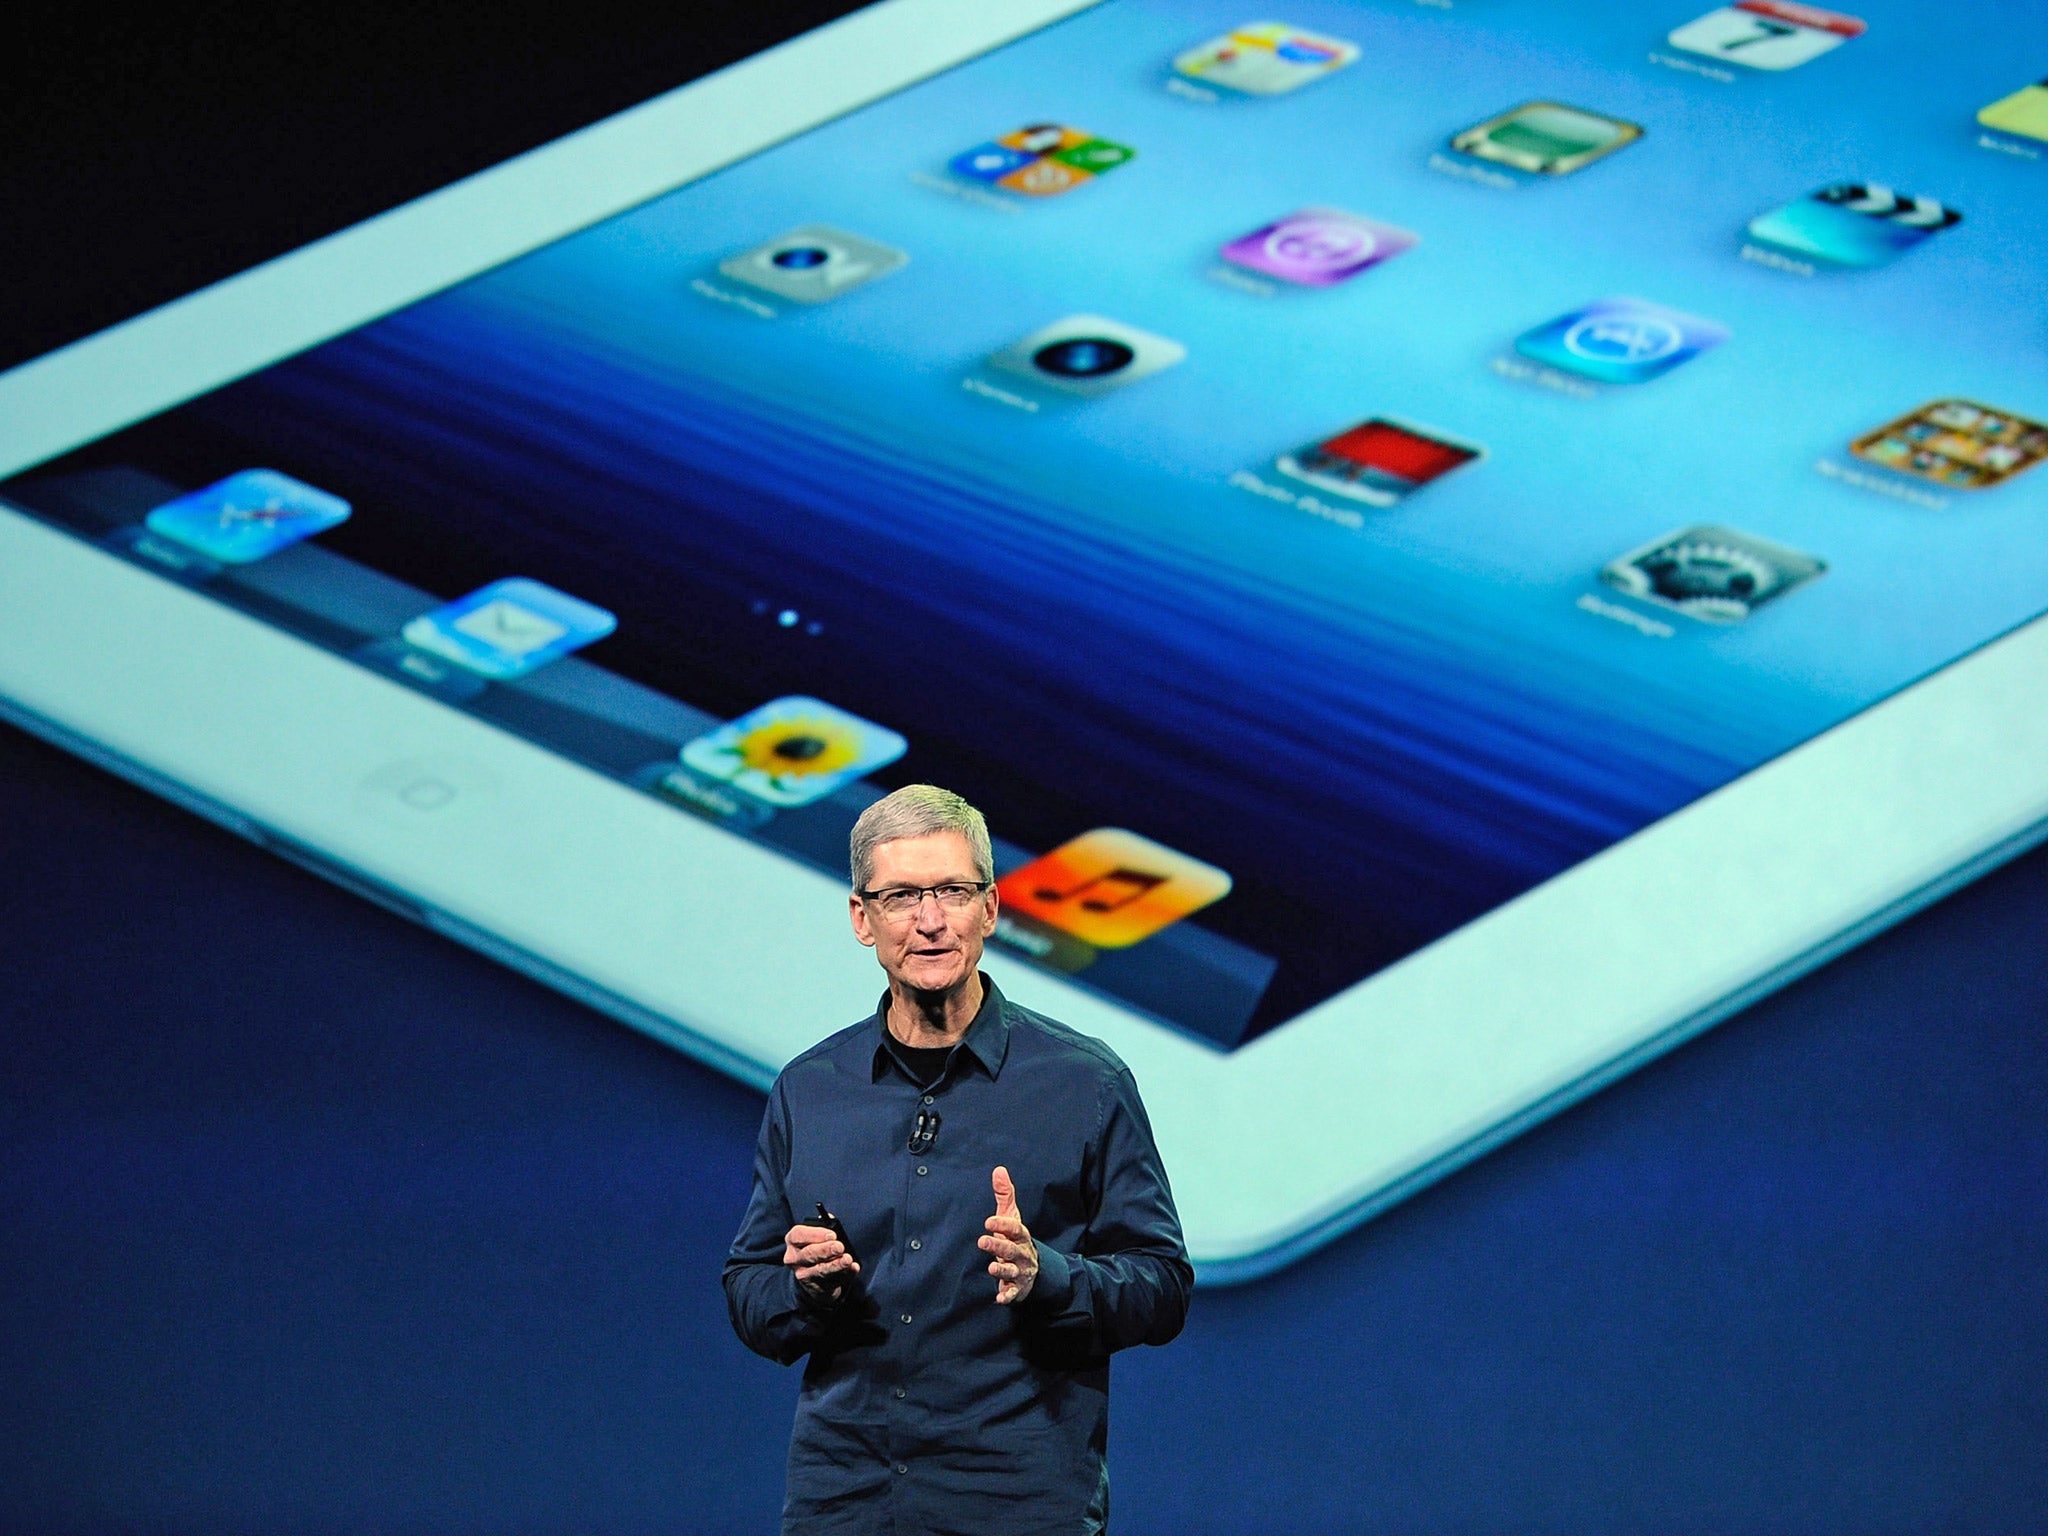 Apple CEO Tim Cook unveiling the fourth generation iPad in 2012